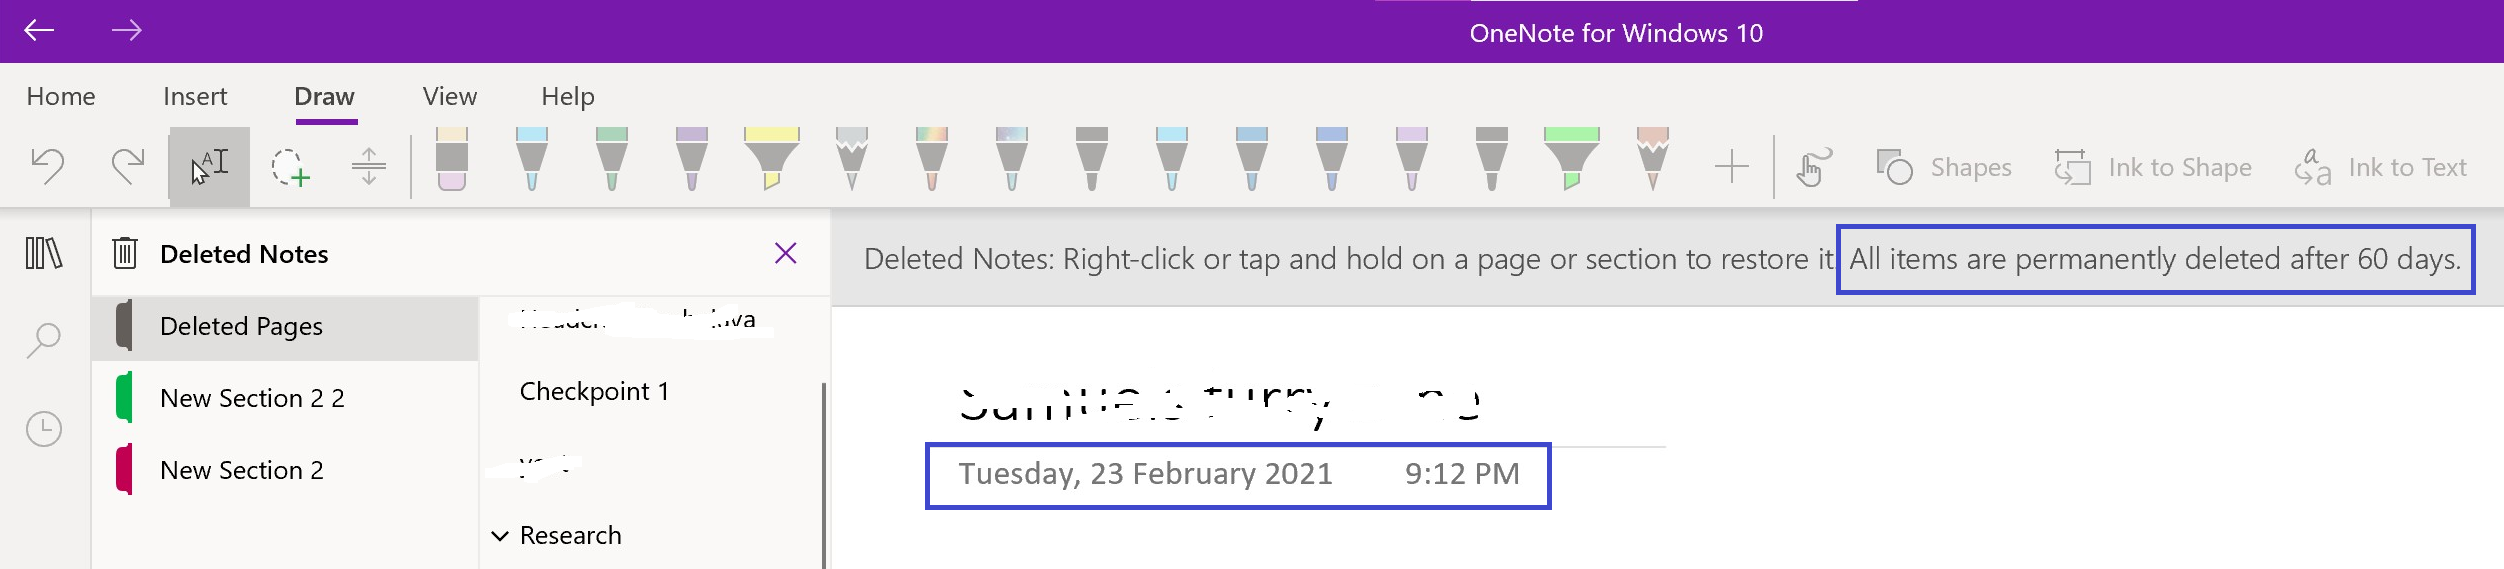 98067-onenote.png